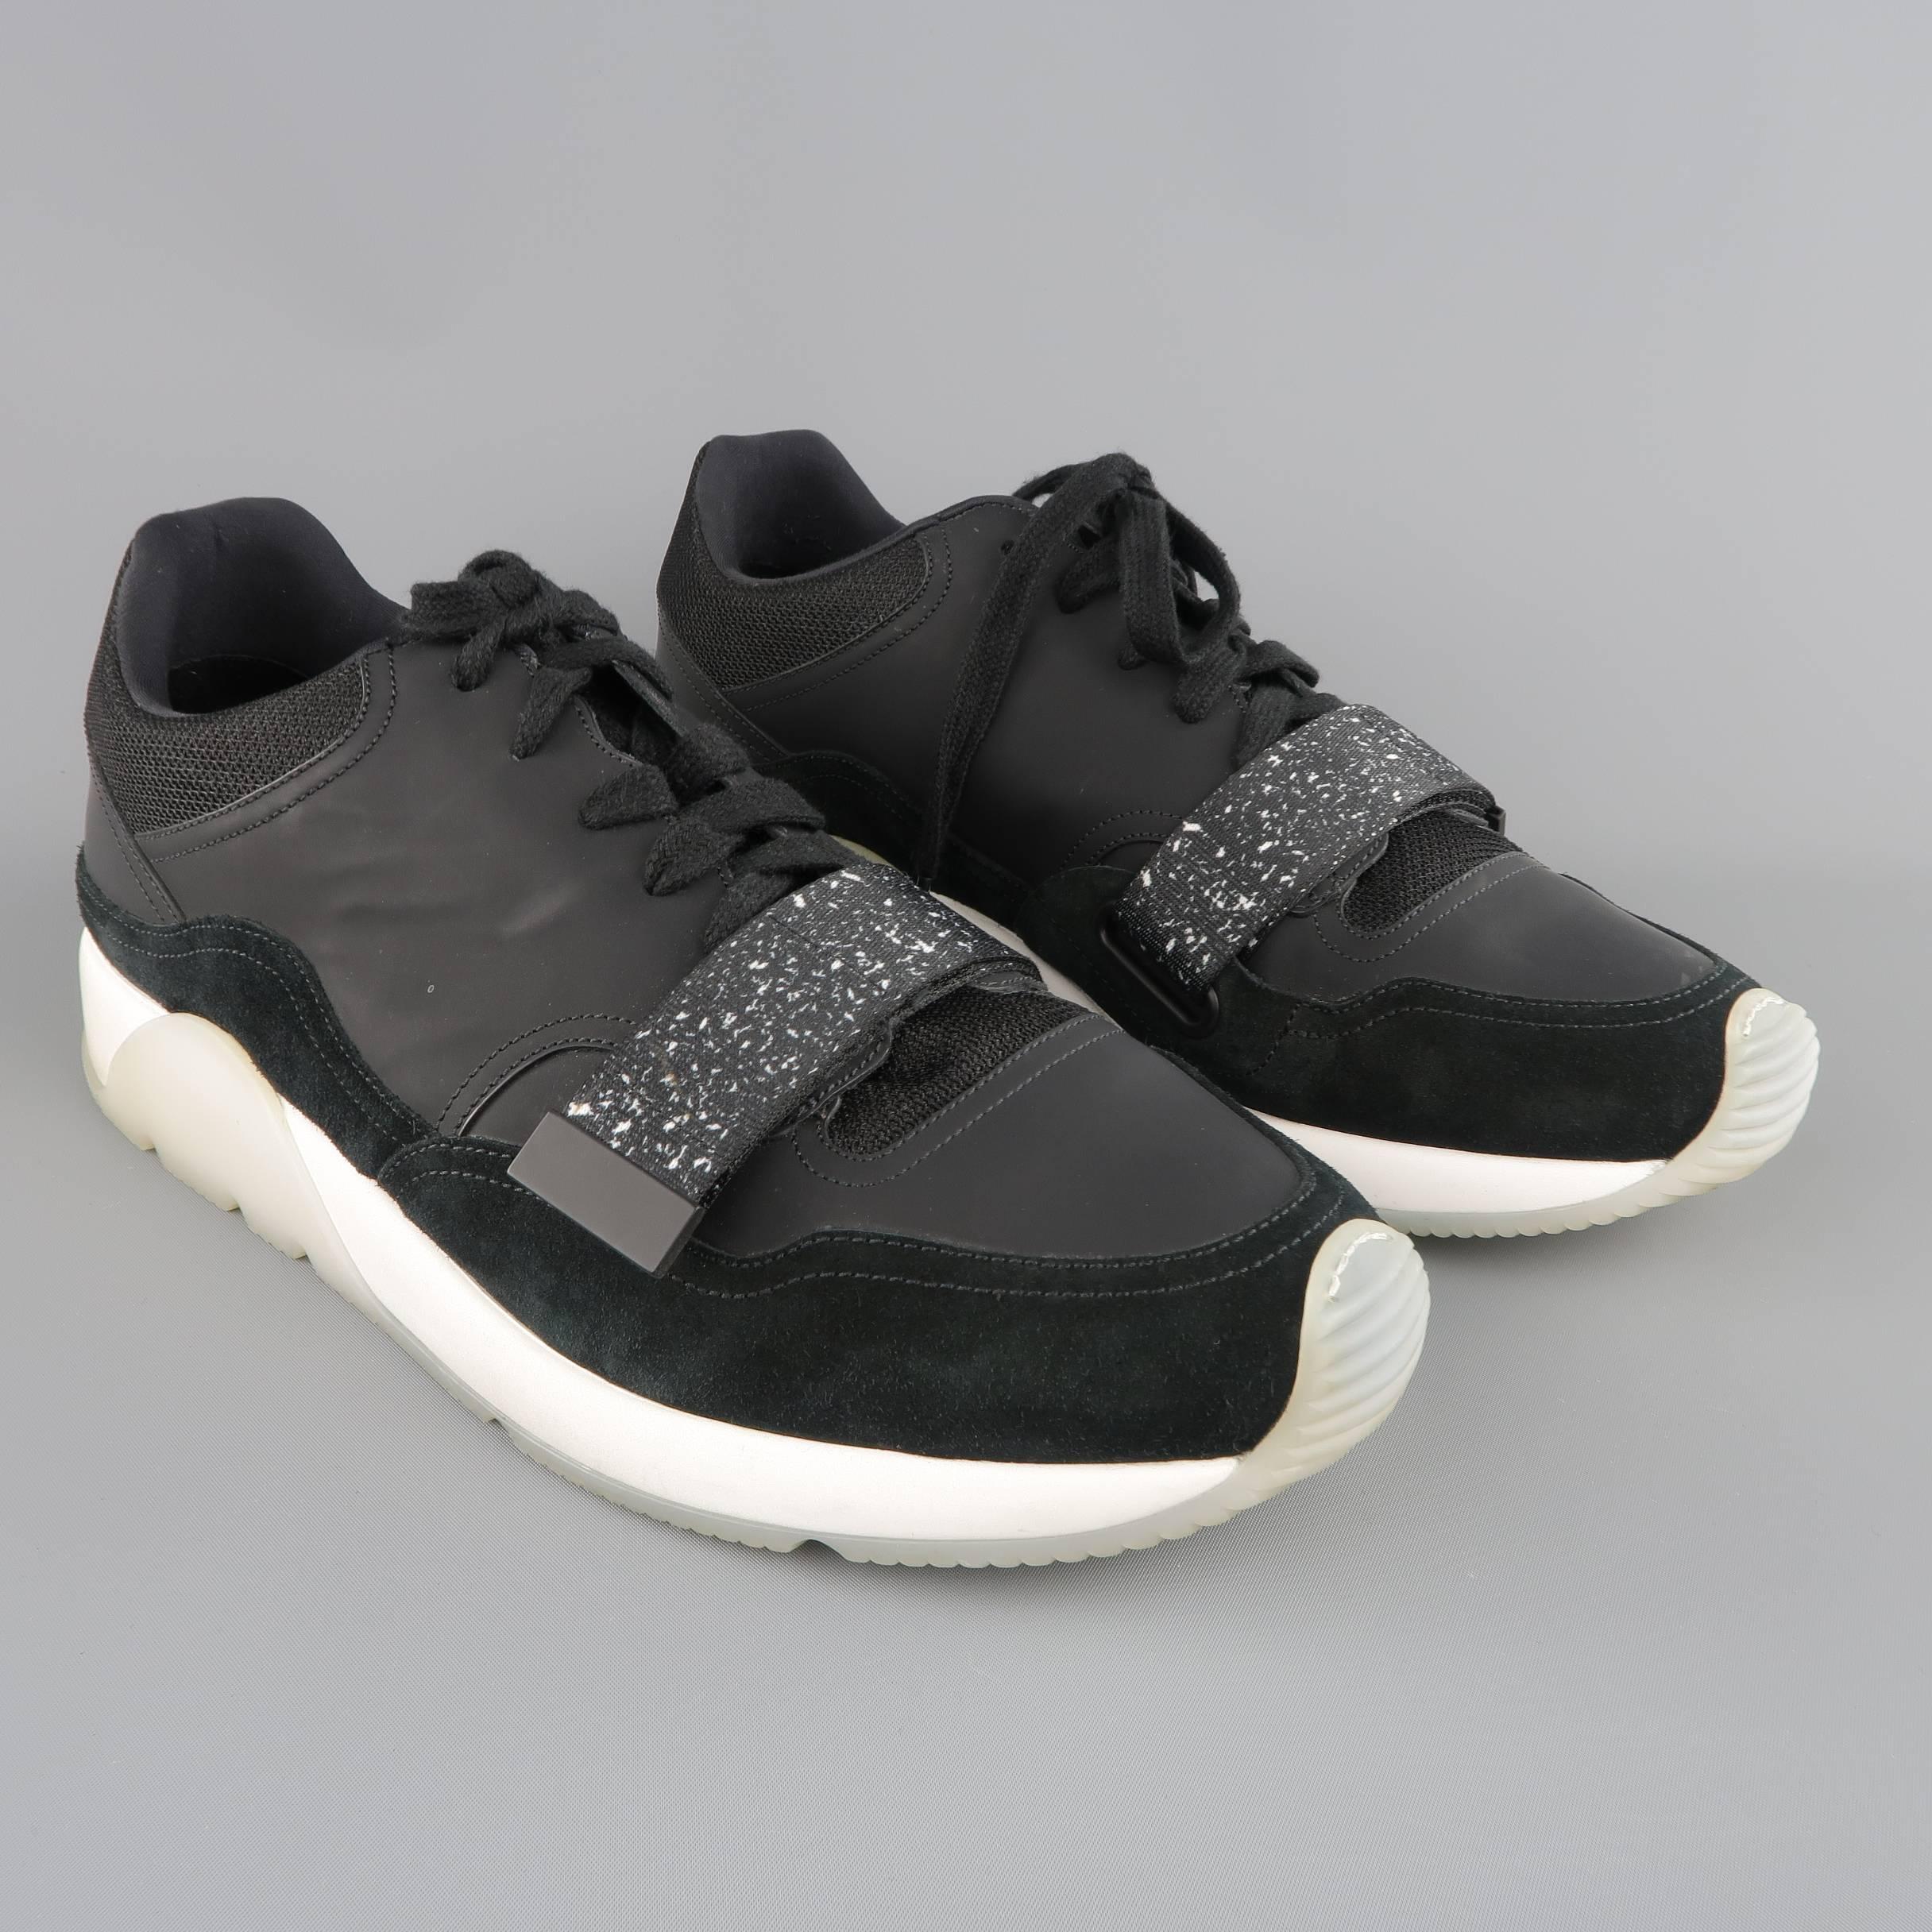 DIOR HOMME Spring 2015 lace up sneakers come in black rubberized leather with suede and mesh panels with a white and clear platform trainer sole and black and white speckled velcro strap. Minor Wear. Made in Italy.
 
Good Pre-Owned